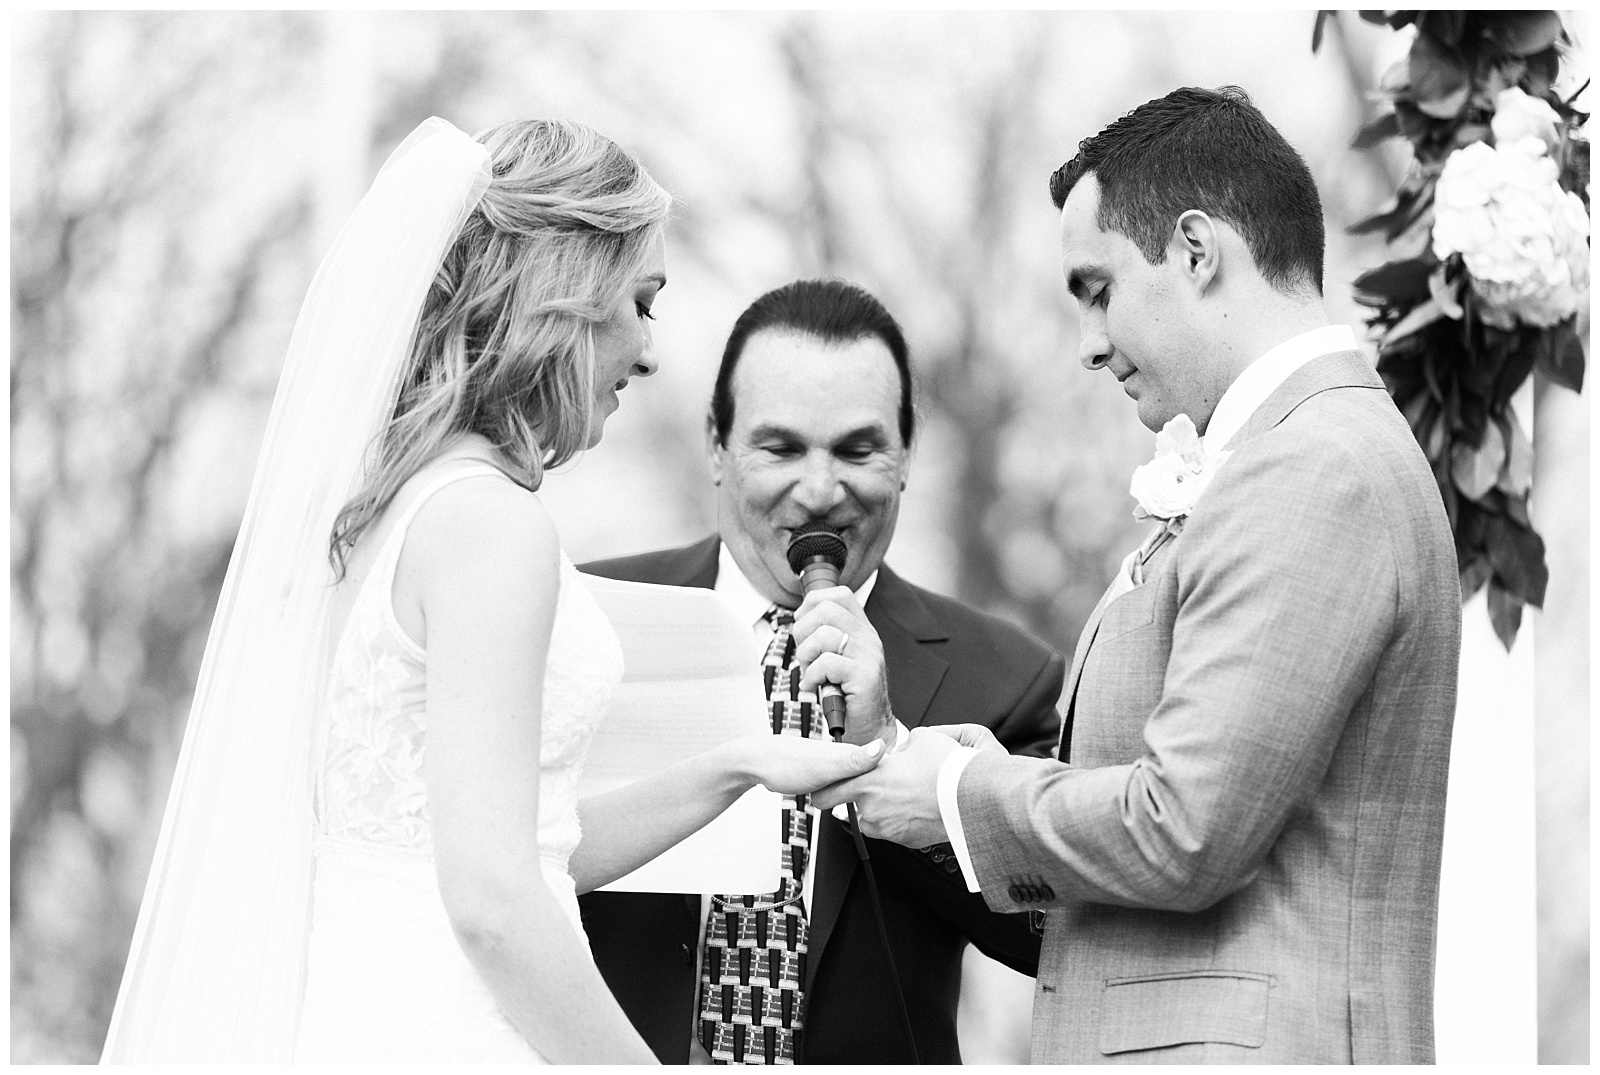 Groom puts a ring on the bride's finger during the ceremony.